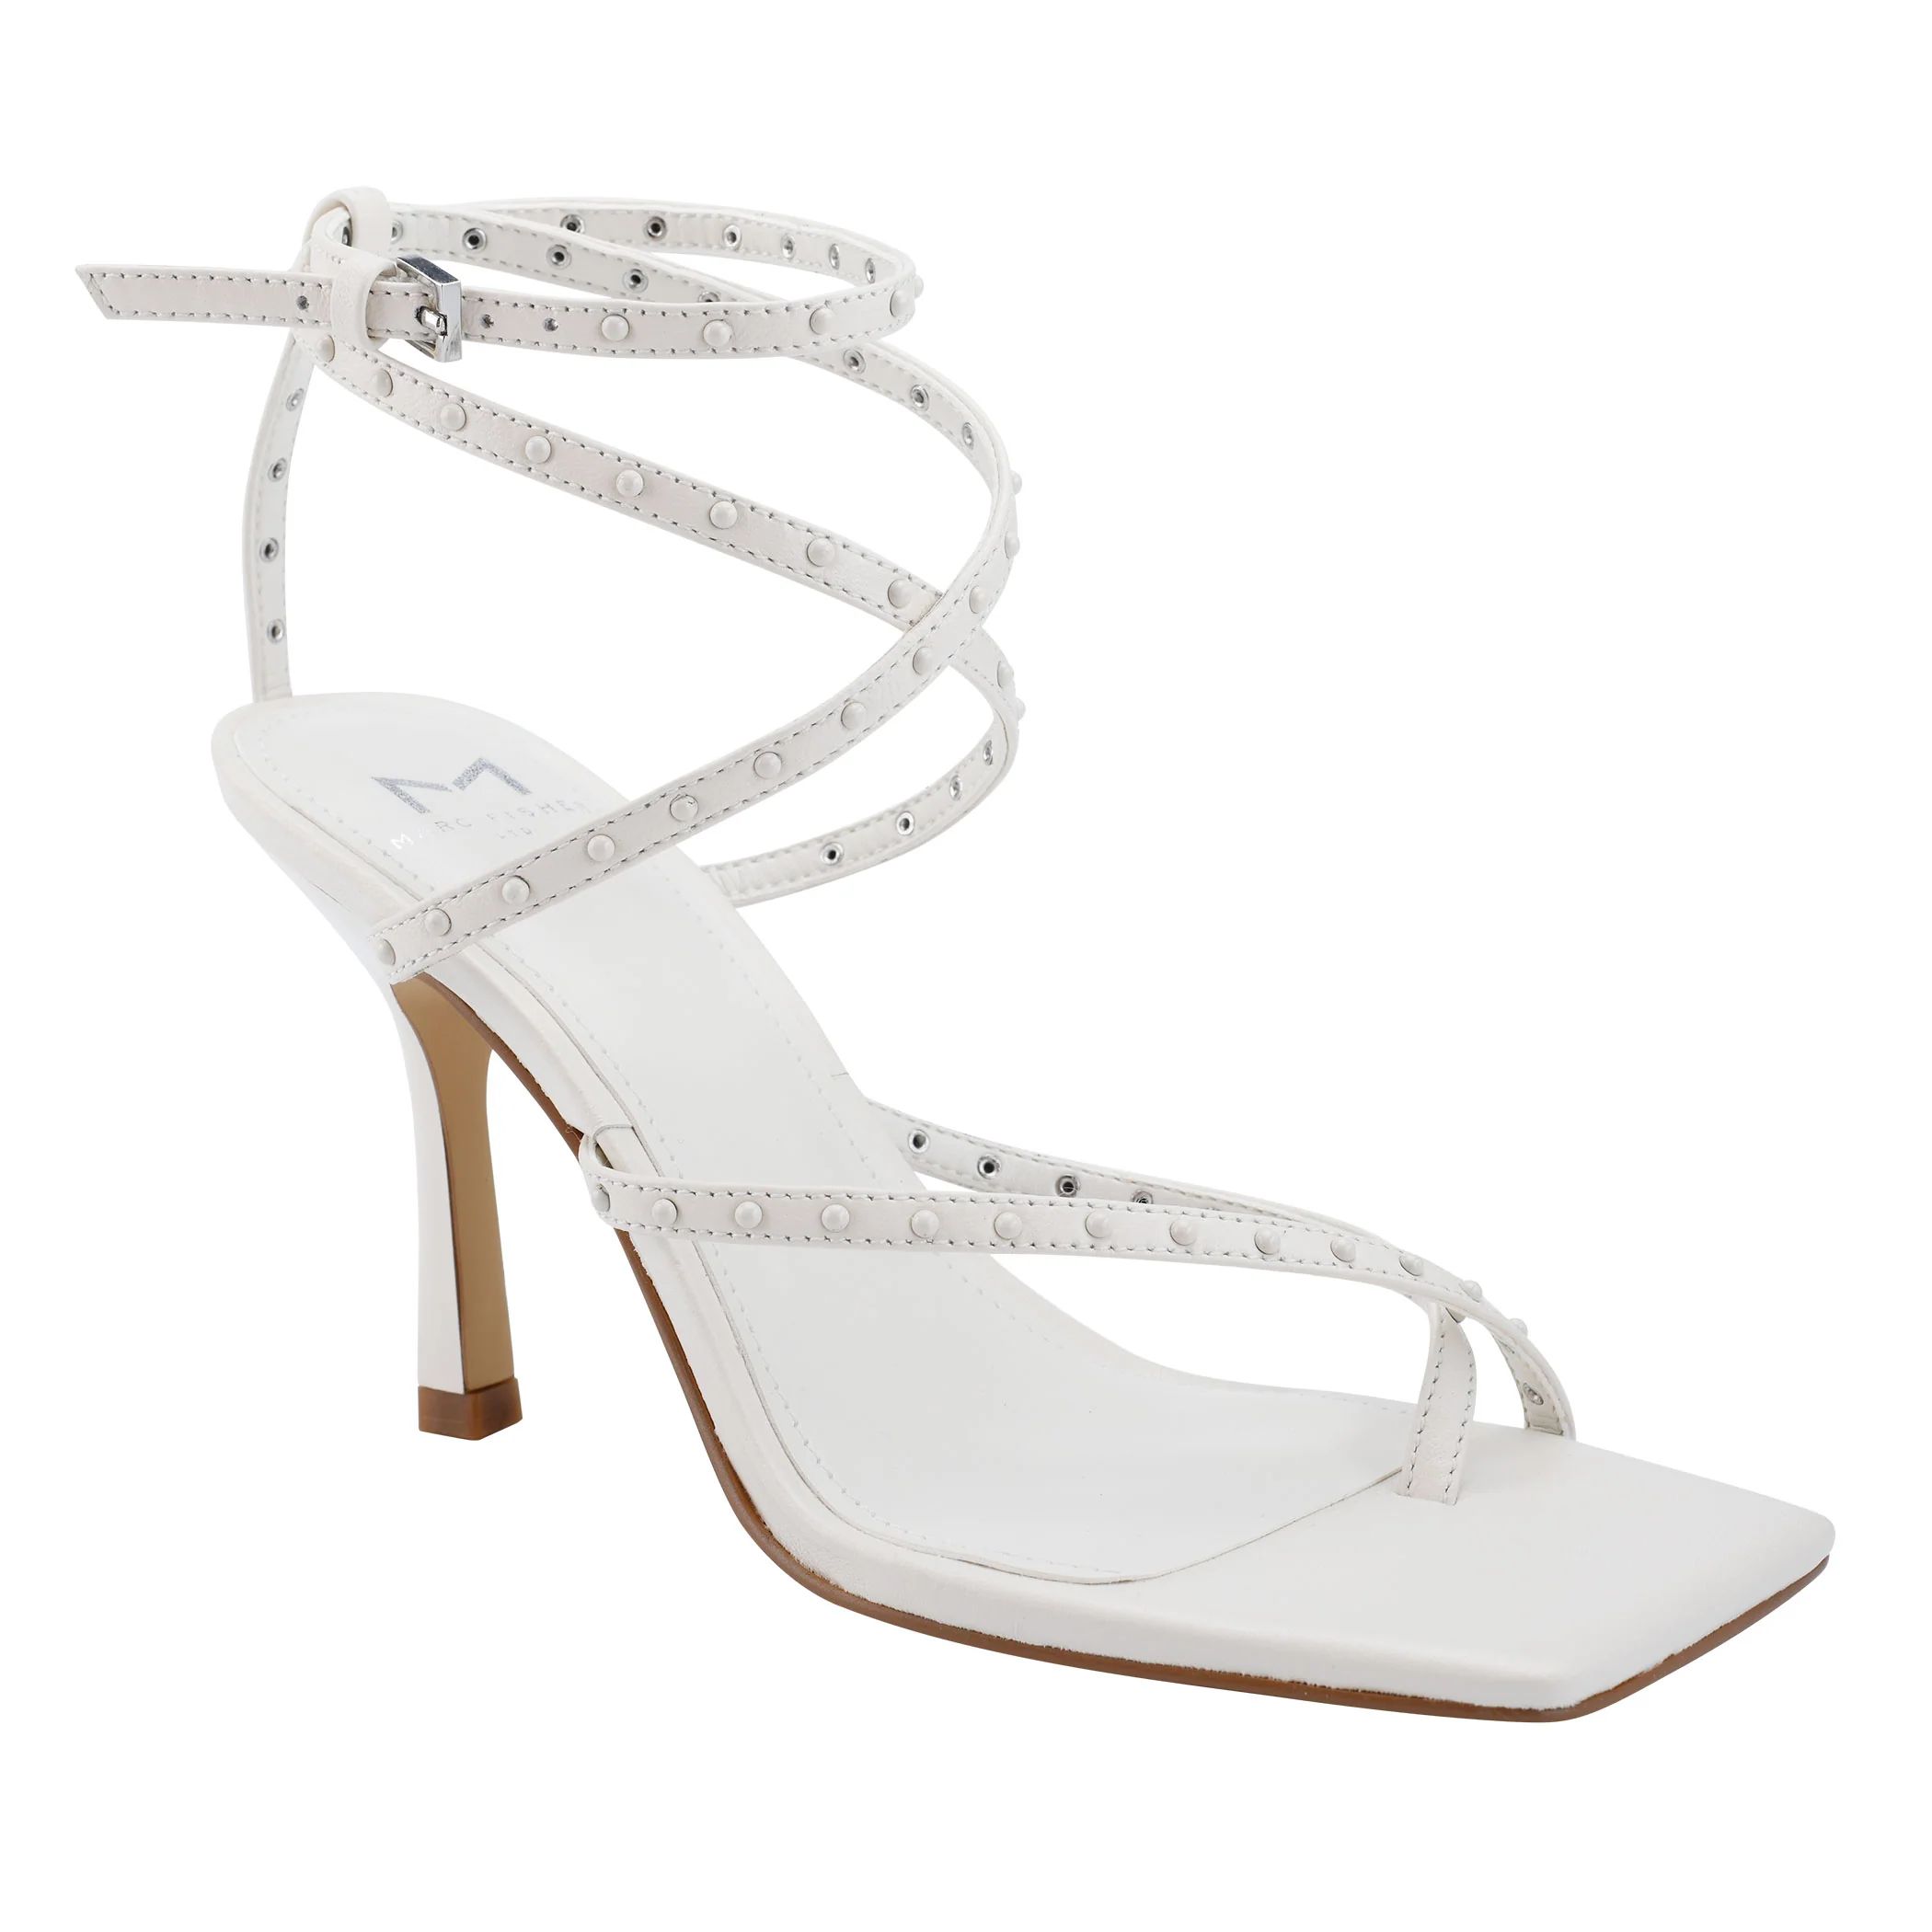 Dallin Strappy Heeled Sandal | Marc Fisher